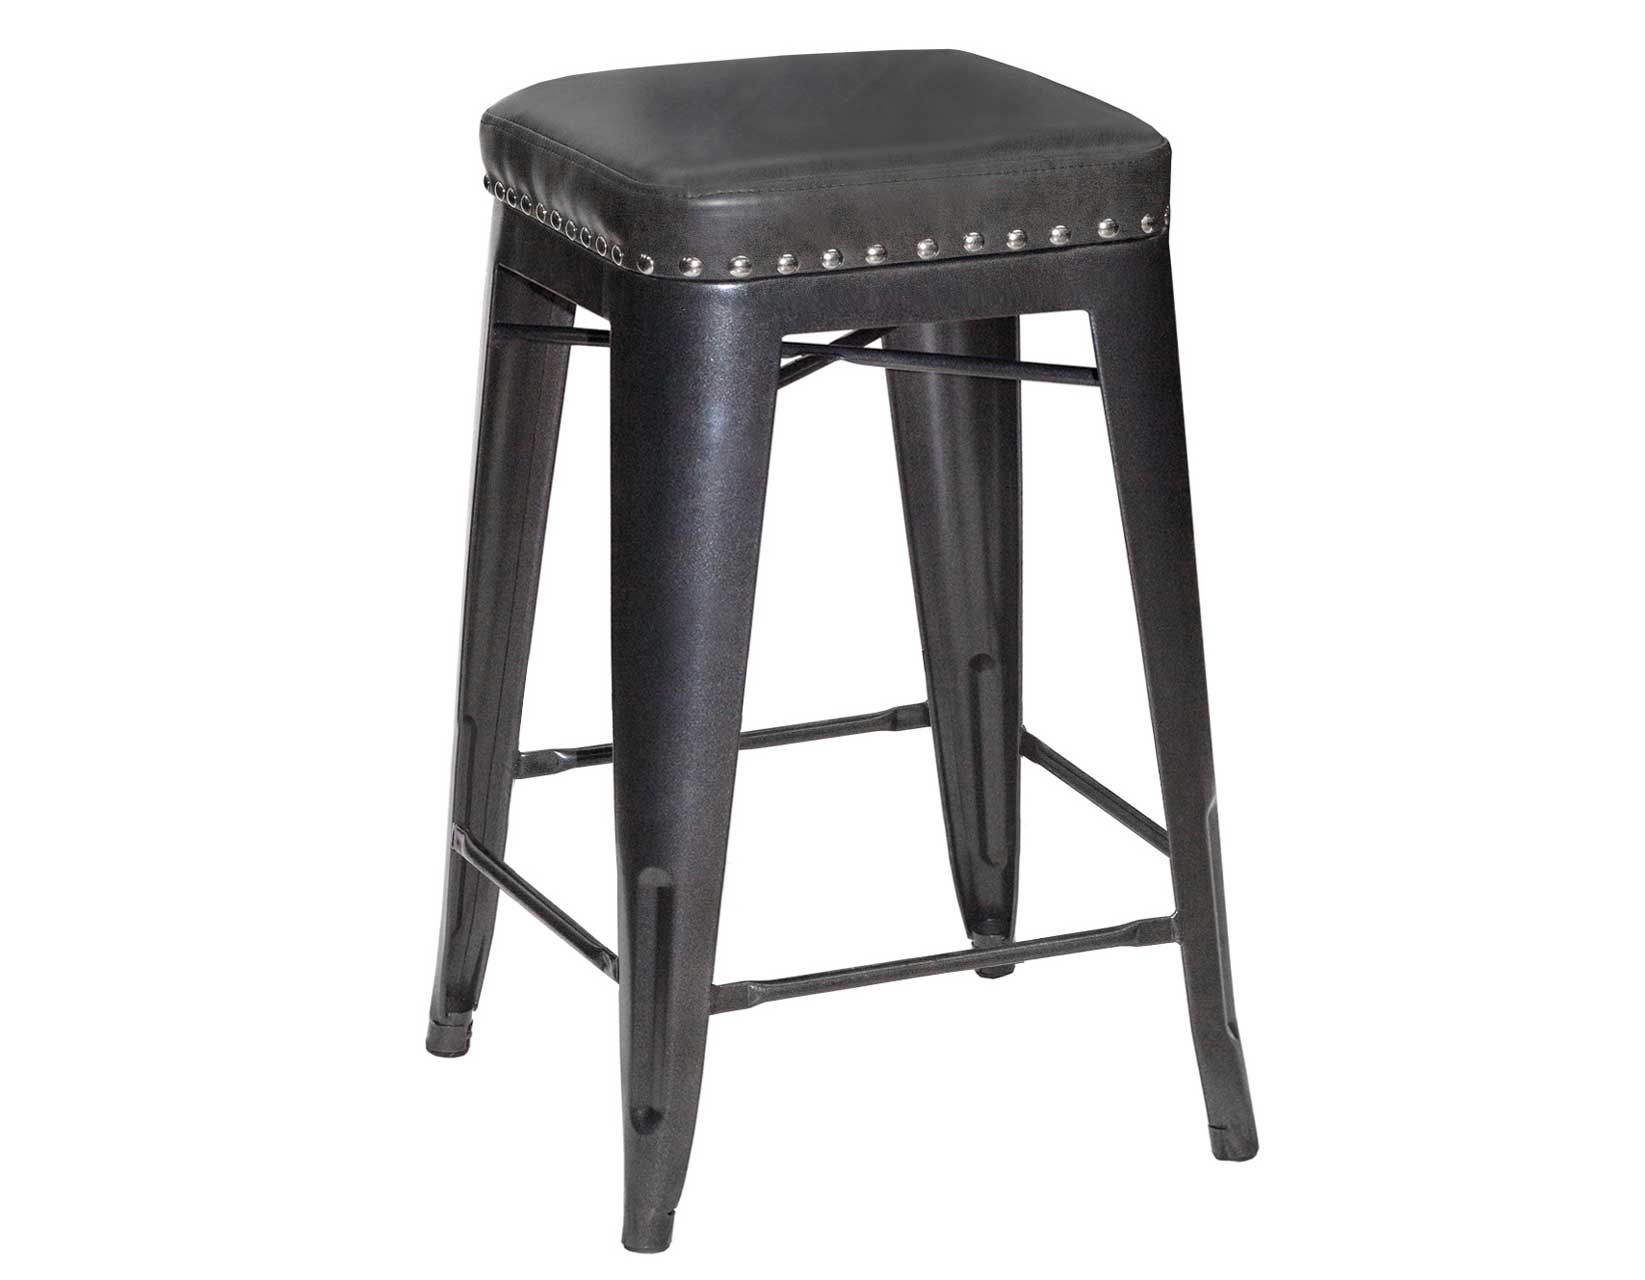 Hank 24" Backless Counter Stool - DFW